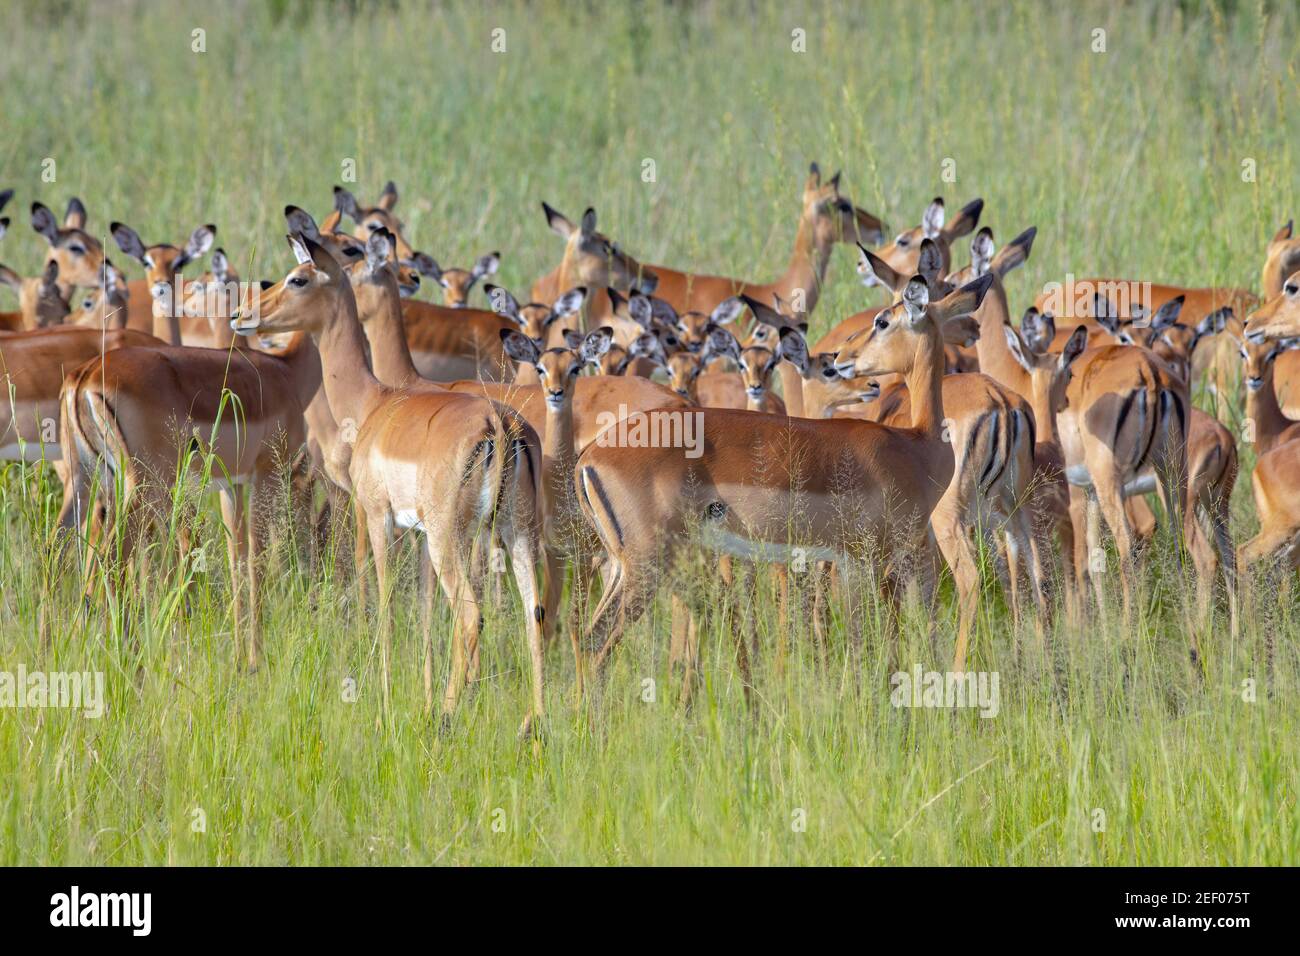 IMPALA (Aepycerus melampus). Herd of females  surrounding their young as a protective precaution against a perceived possible predator in the area. Stock Photo